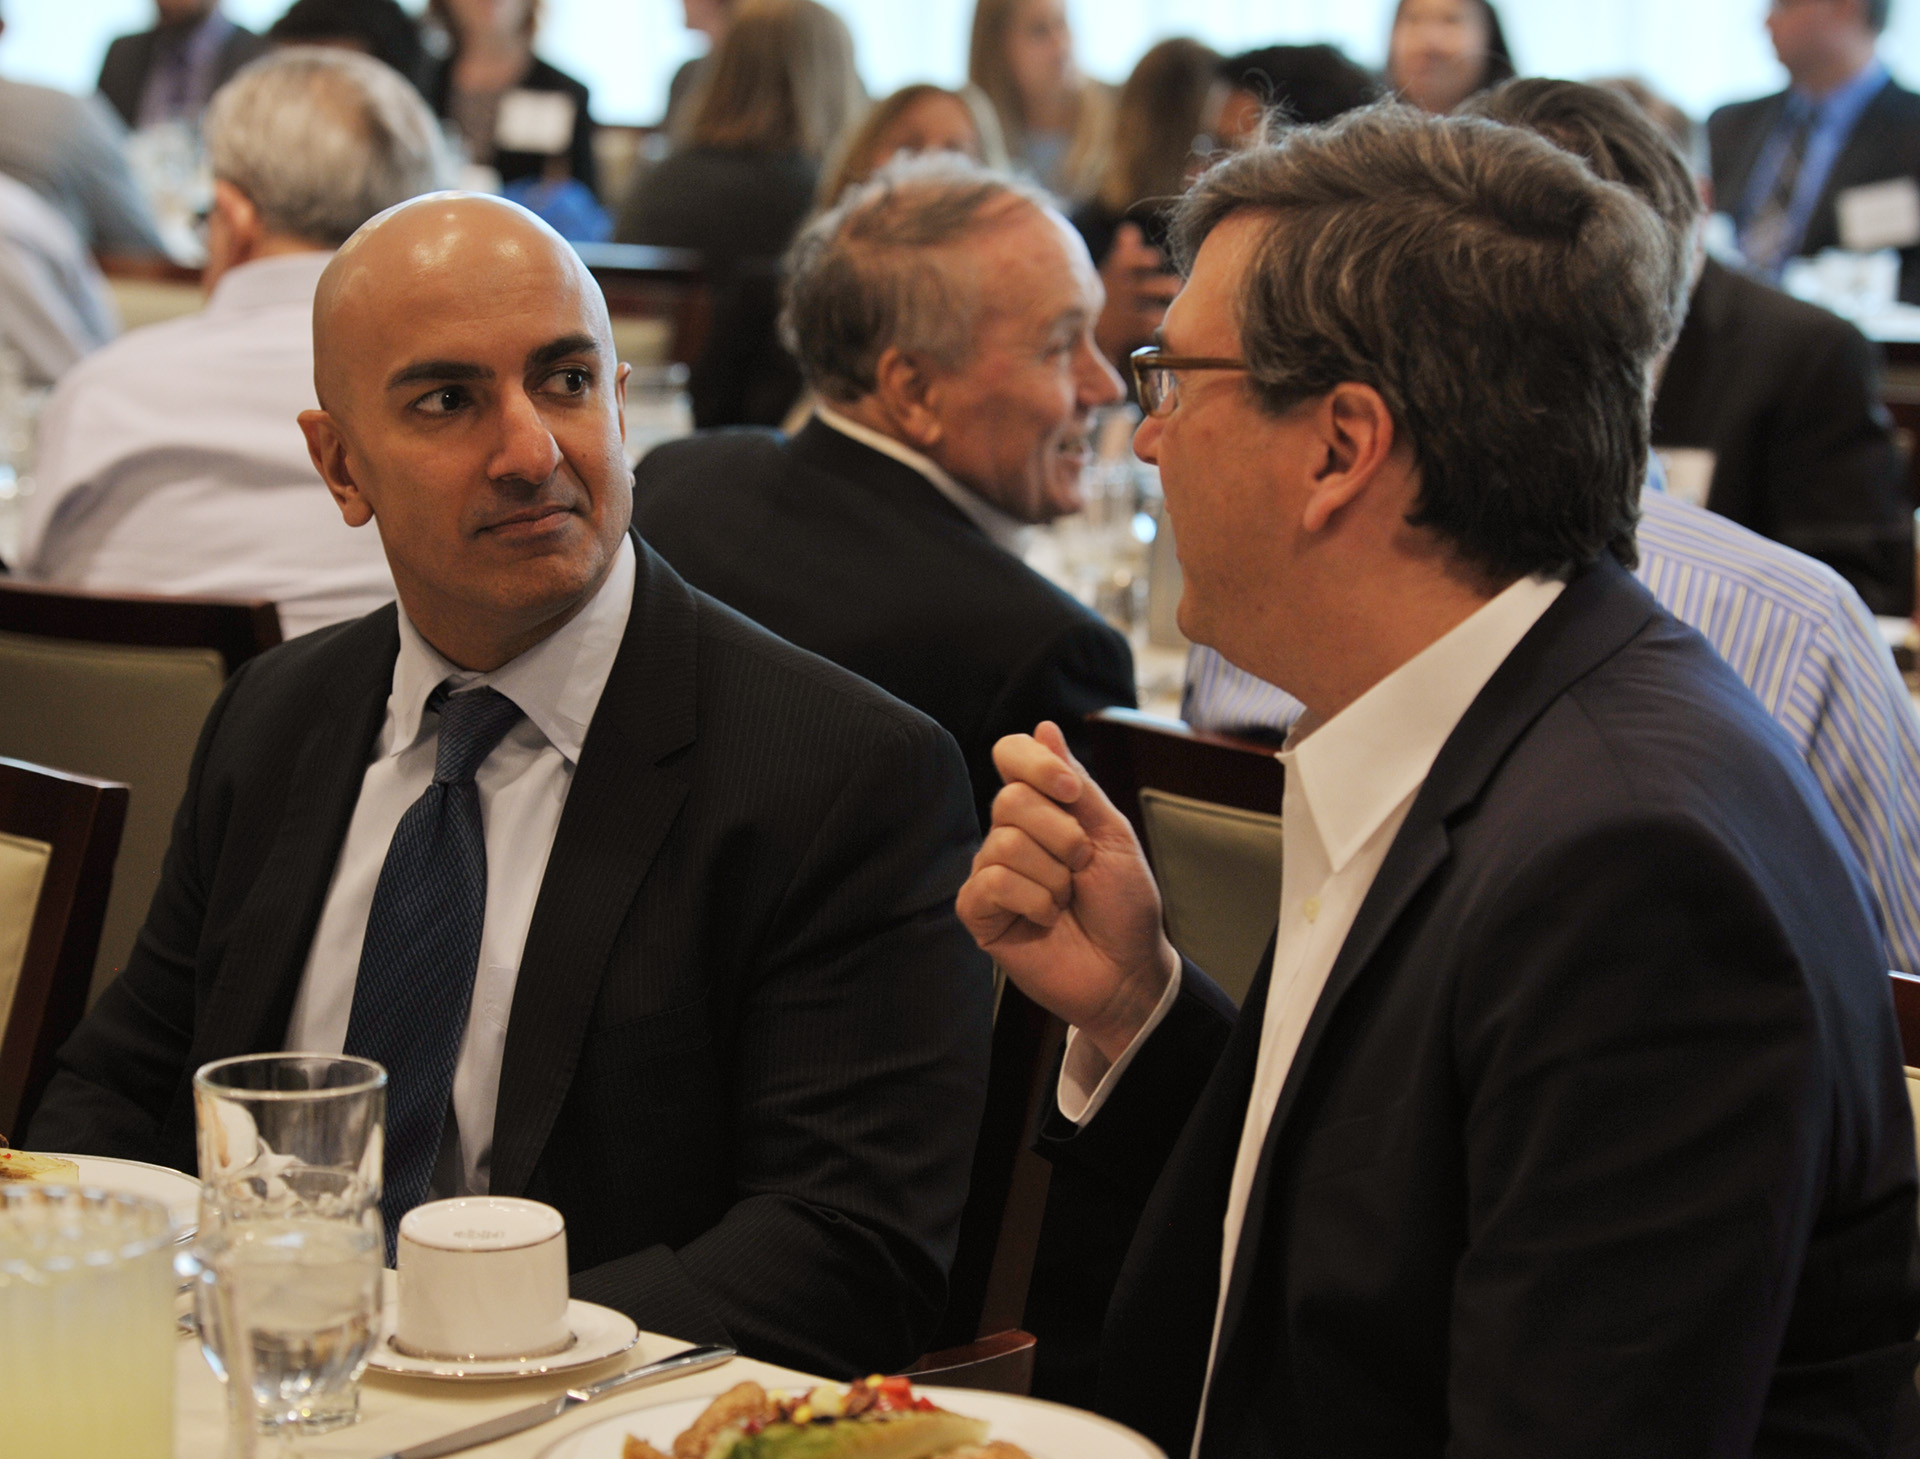 Kashkari and Furman speaking together at lunch